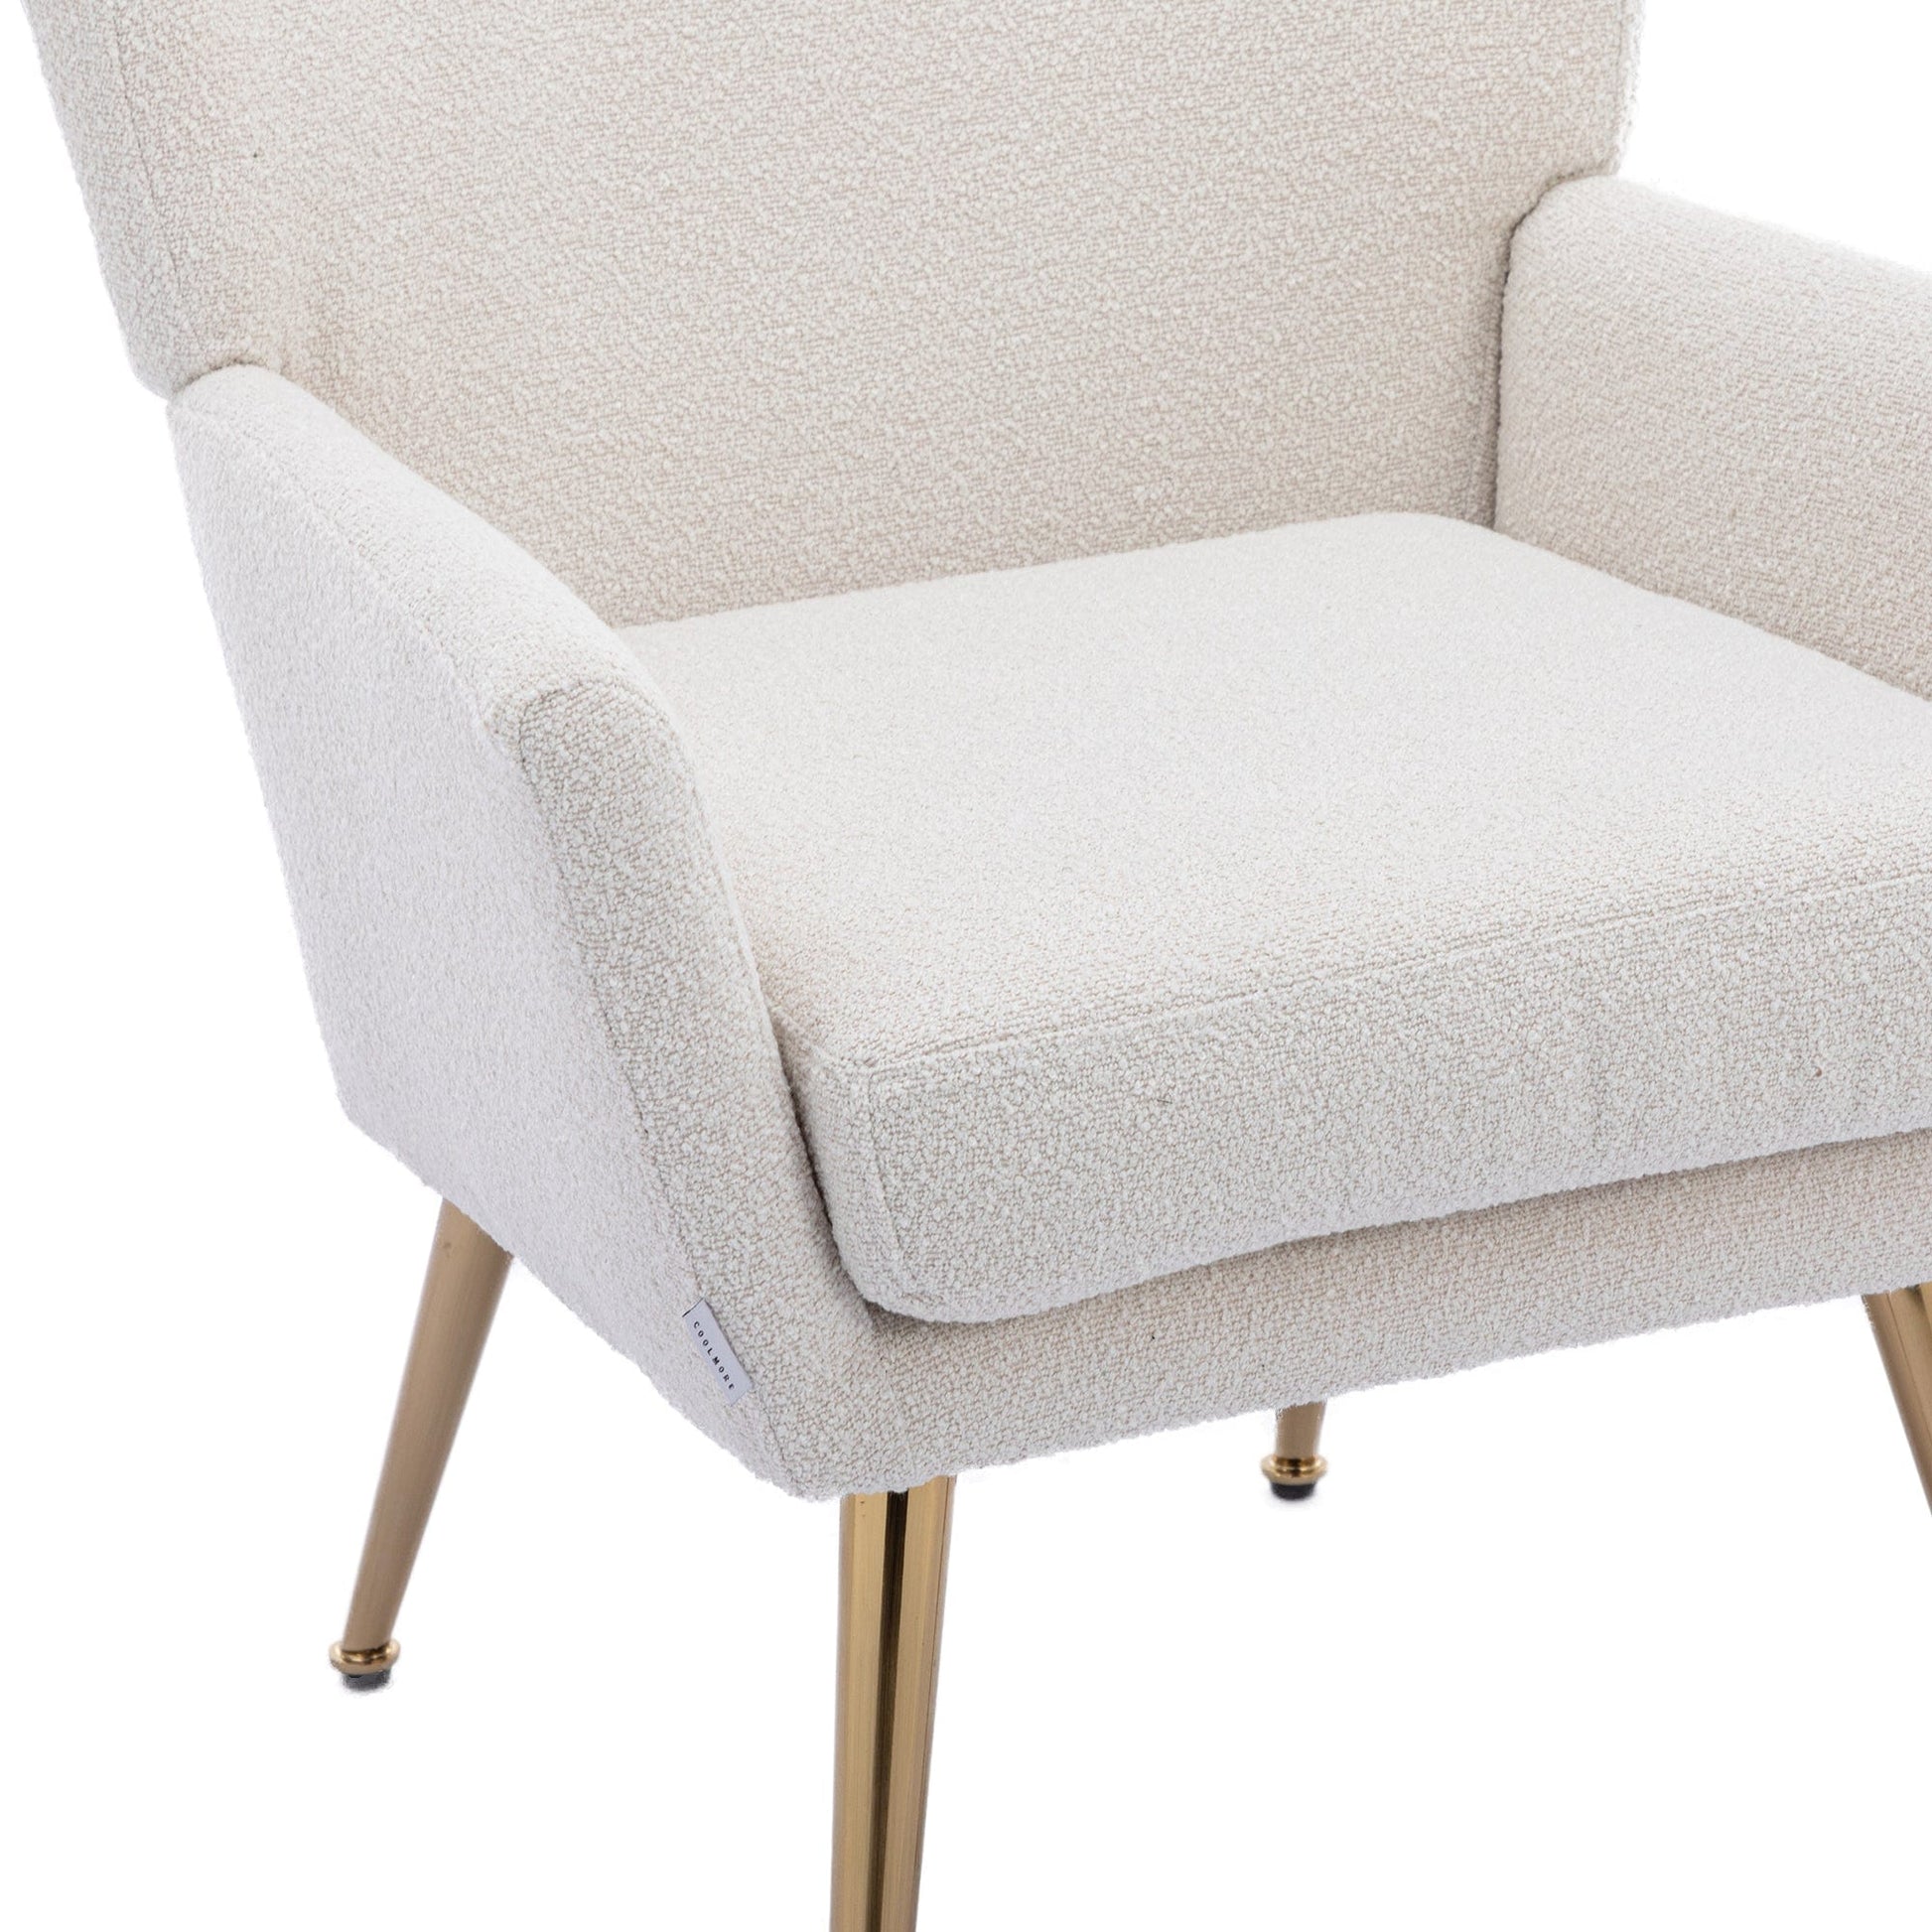 1st Choice Furniture Direct Accent Chair 1st Choice Fish Tail Accent Chair with Golden Legs